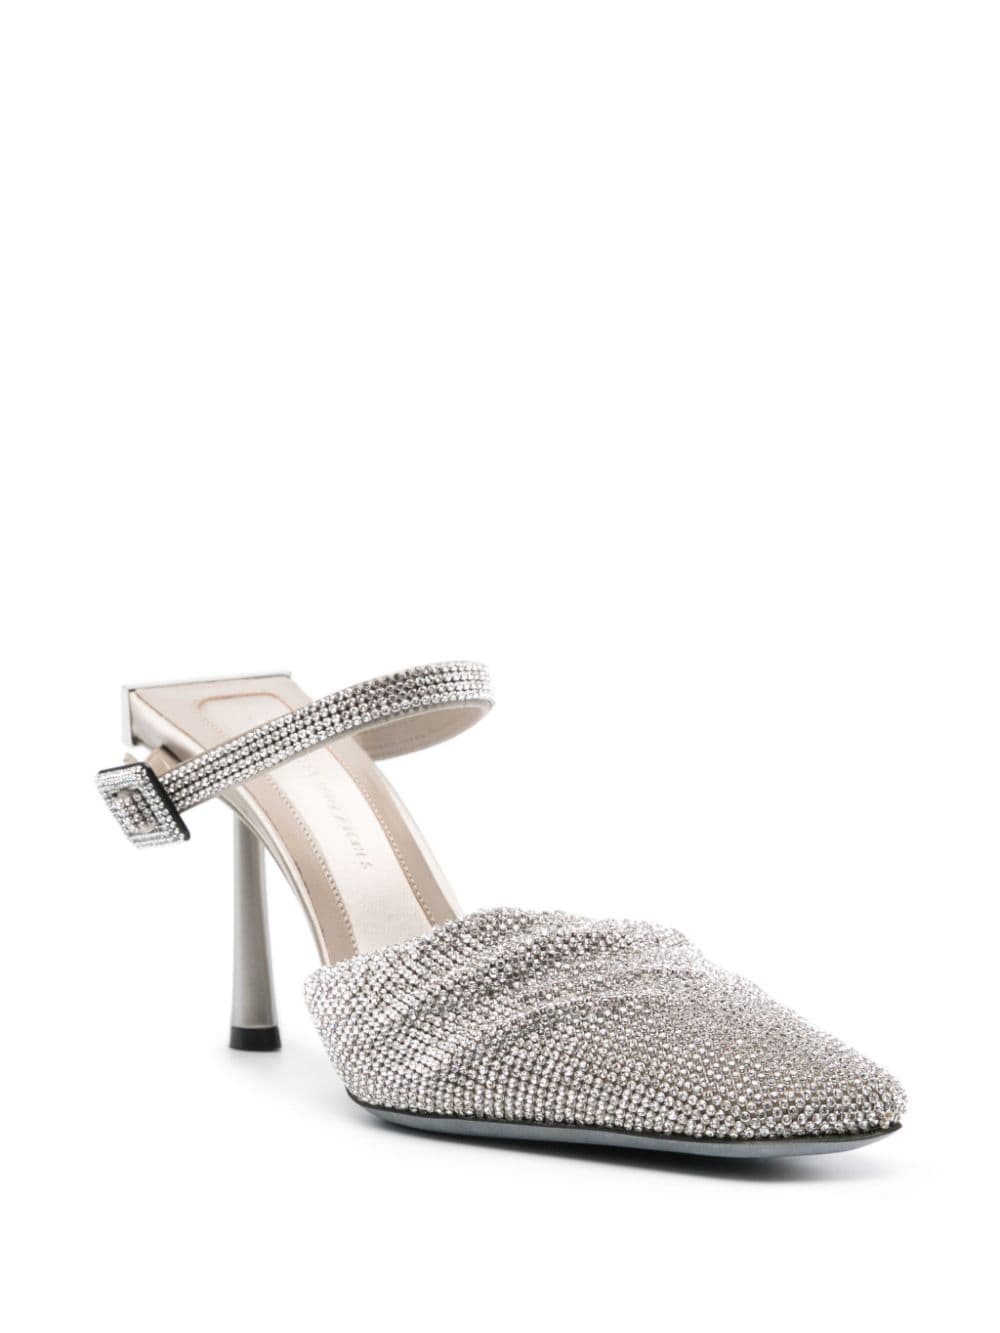 Shop Benedetta Bruzziches Elena 100mm Crystal-embellished Mules In Grey